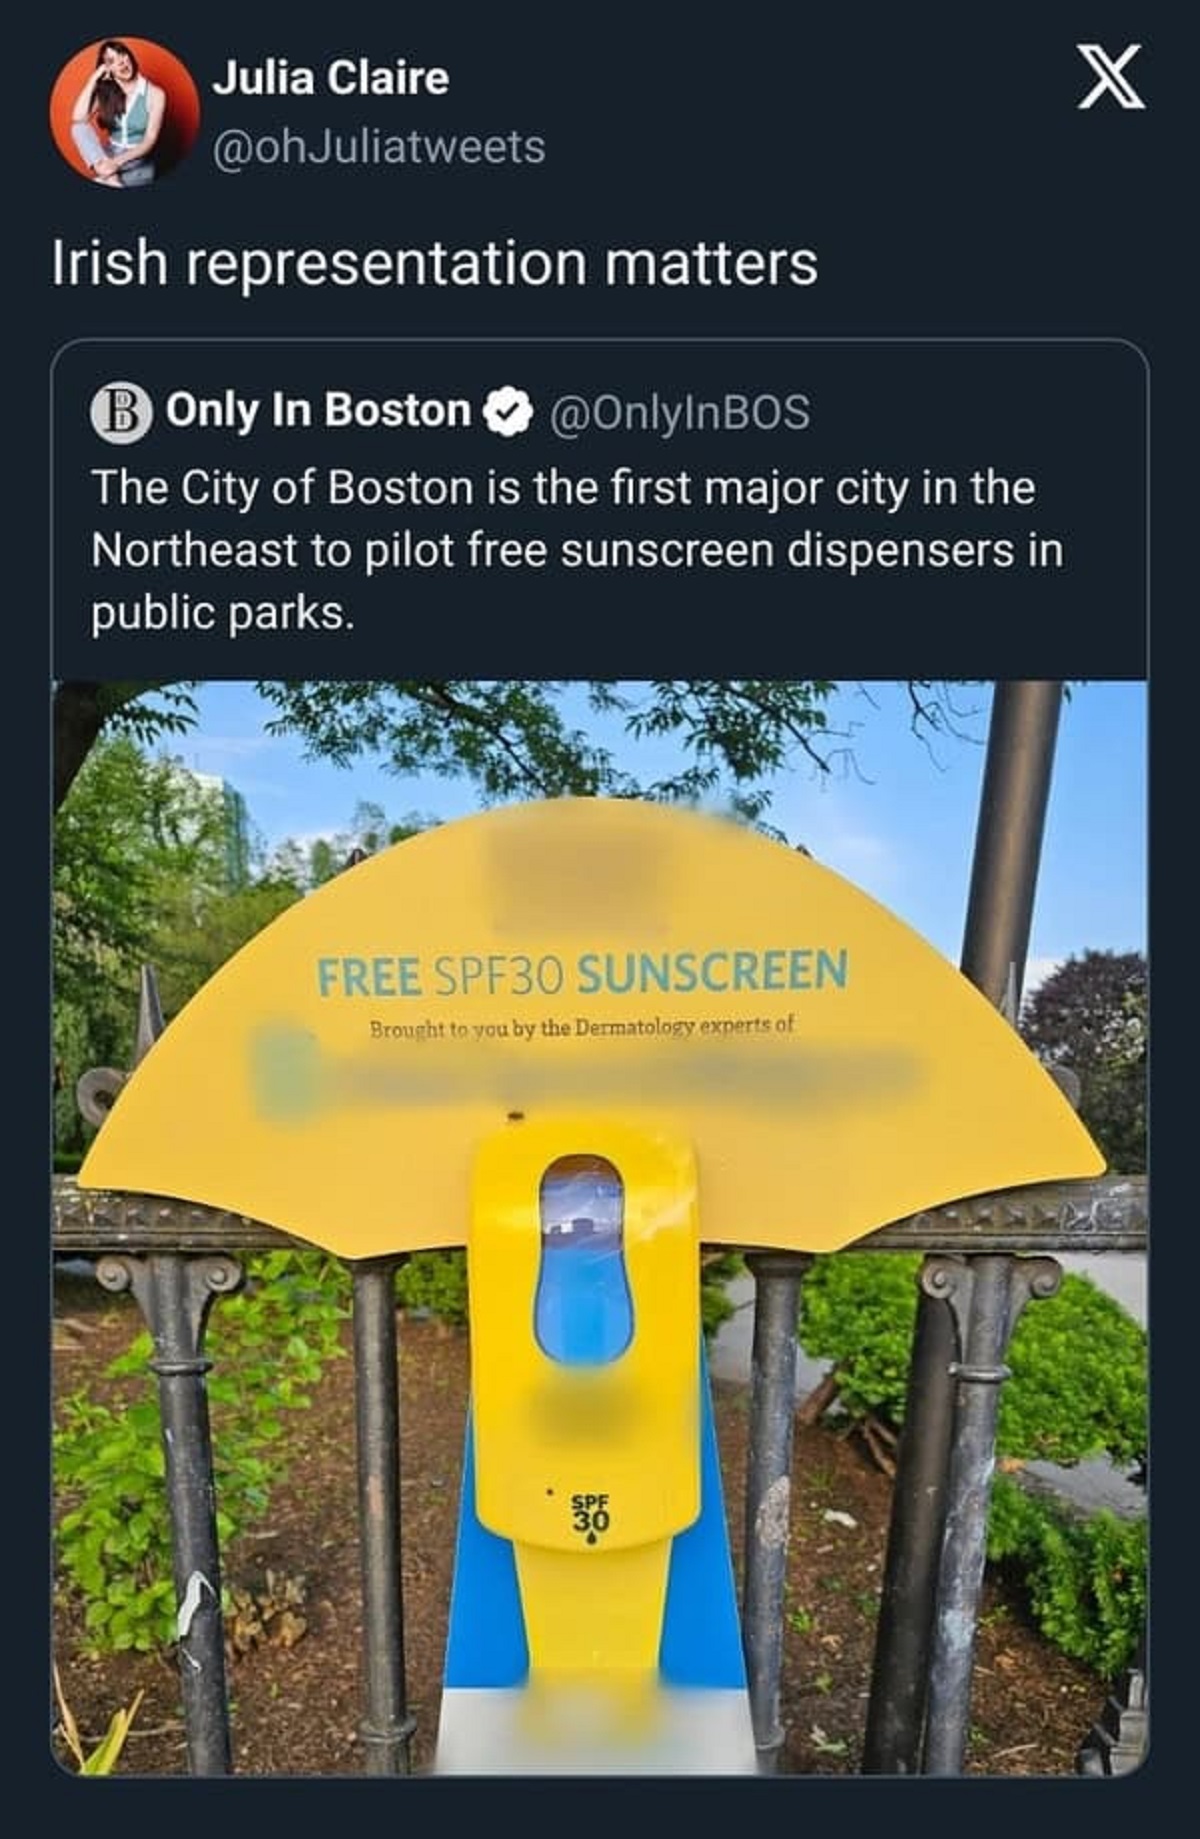 tree - Julia Claire Irish representation matters Only In Boston The City of Boston is the first major city in the Northeast to pilot free sunscreen dispensers in public parks. Free SPF30 Sunscreen X